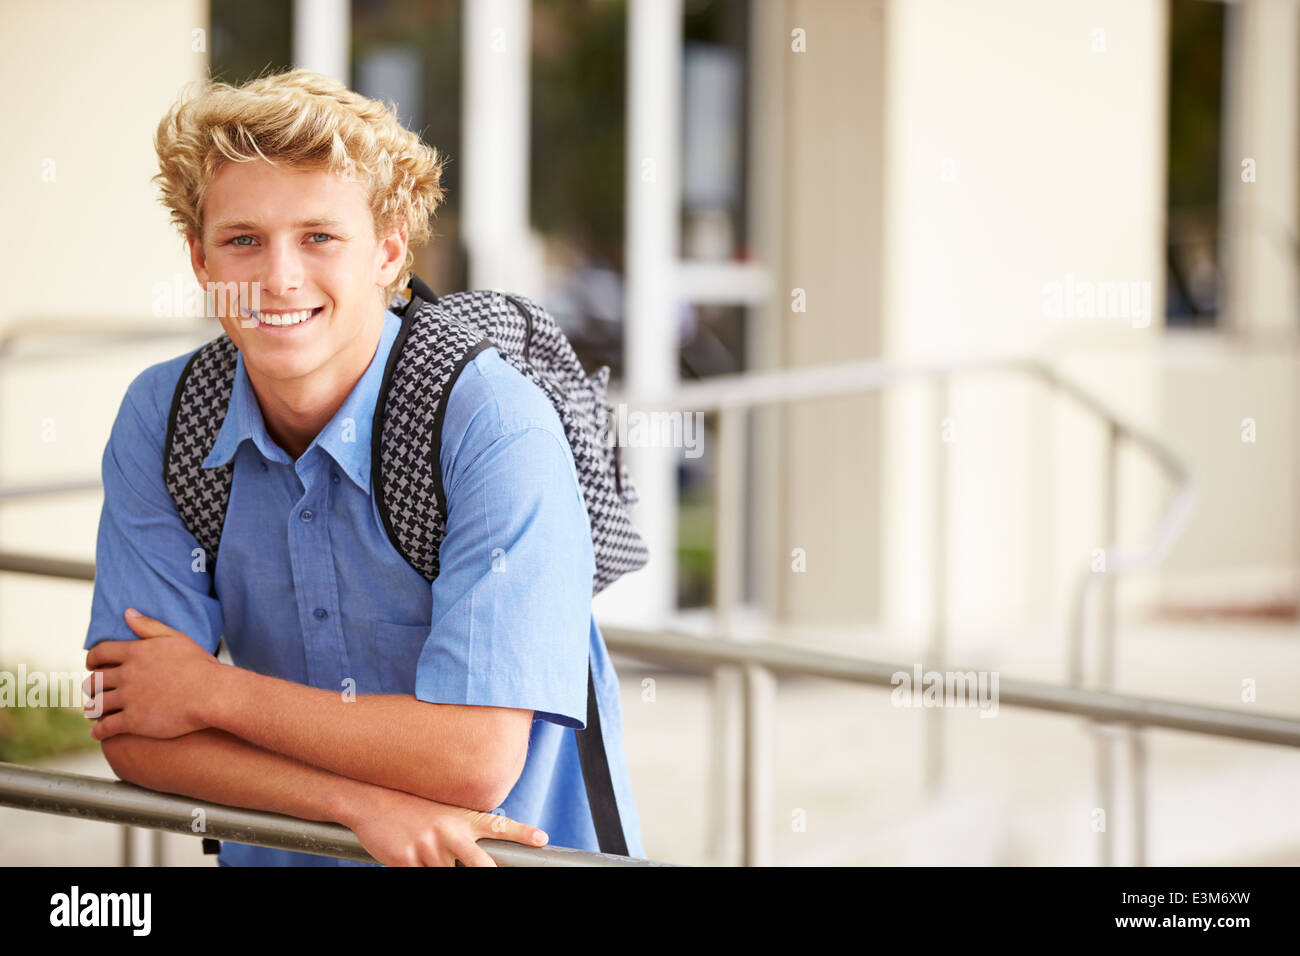 Portrait Of Male High School Student Outdoors Stock Photo